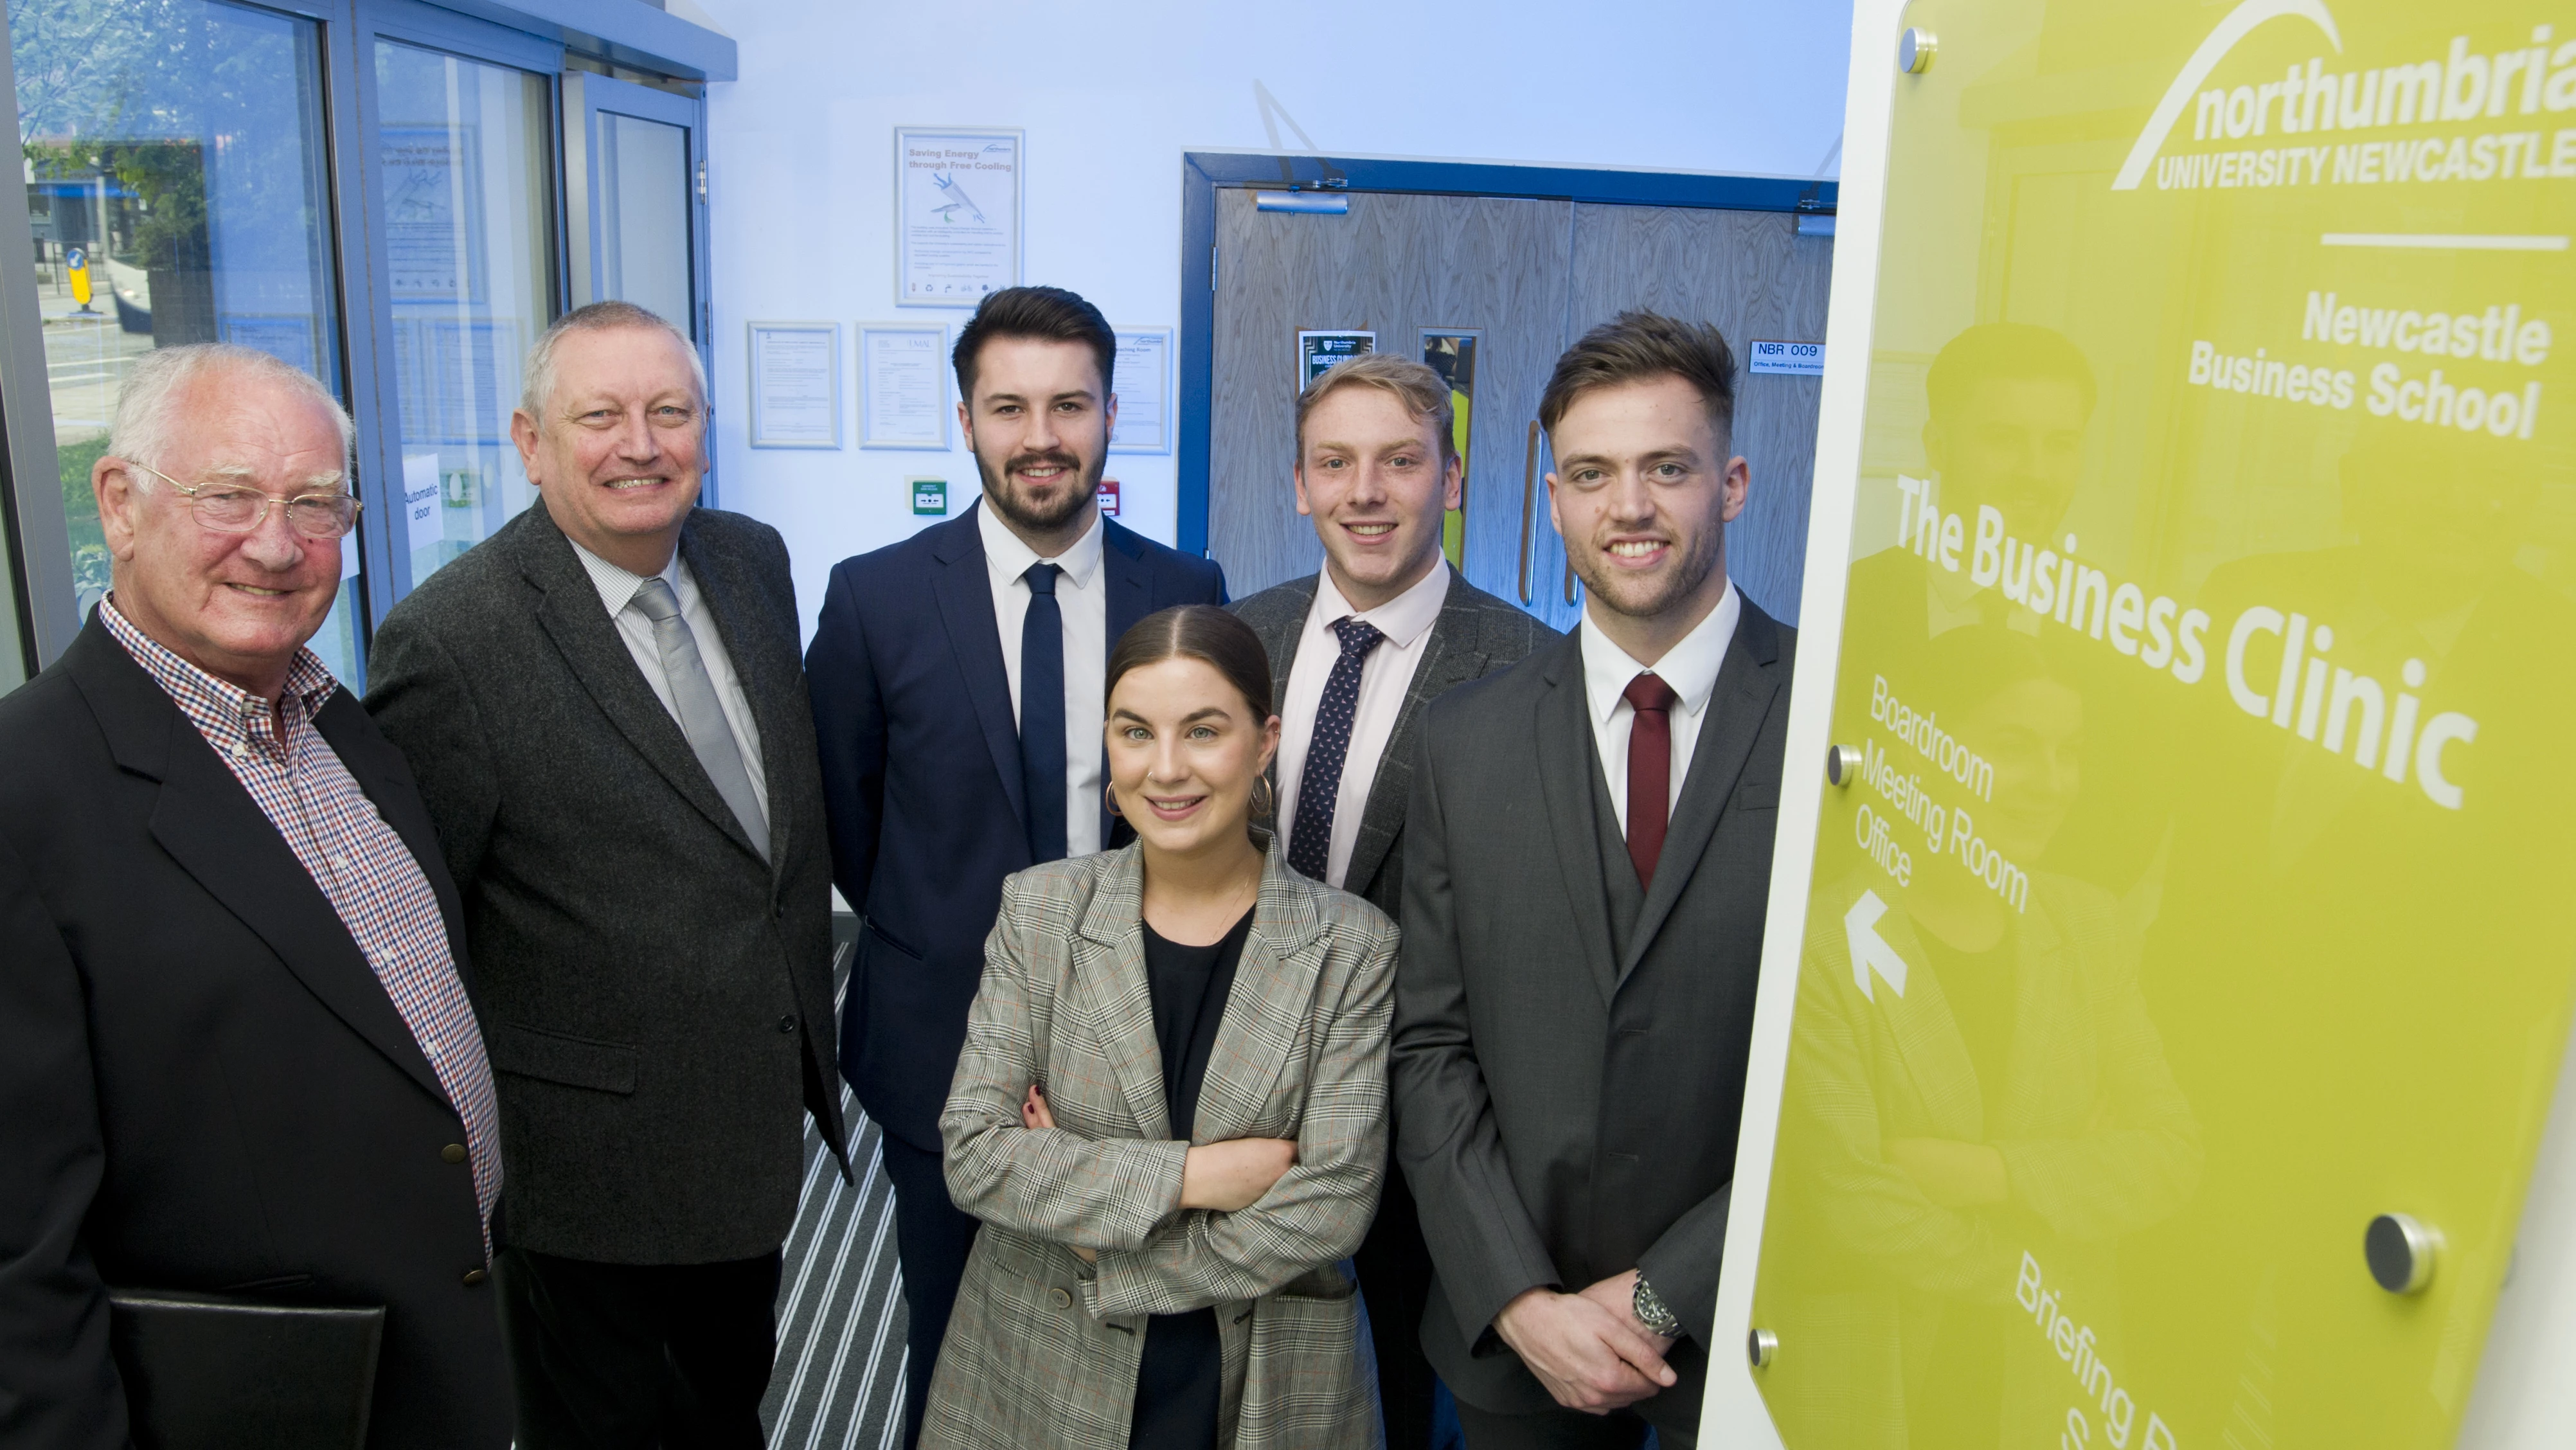 (L to R) George Williams and Ken Brown, chair of Morpeth & District Chamber of Trade with Business Clinic students William Barnes, Oliver Duxbury, Joshua Boland and Rose Stocks.